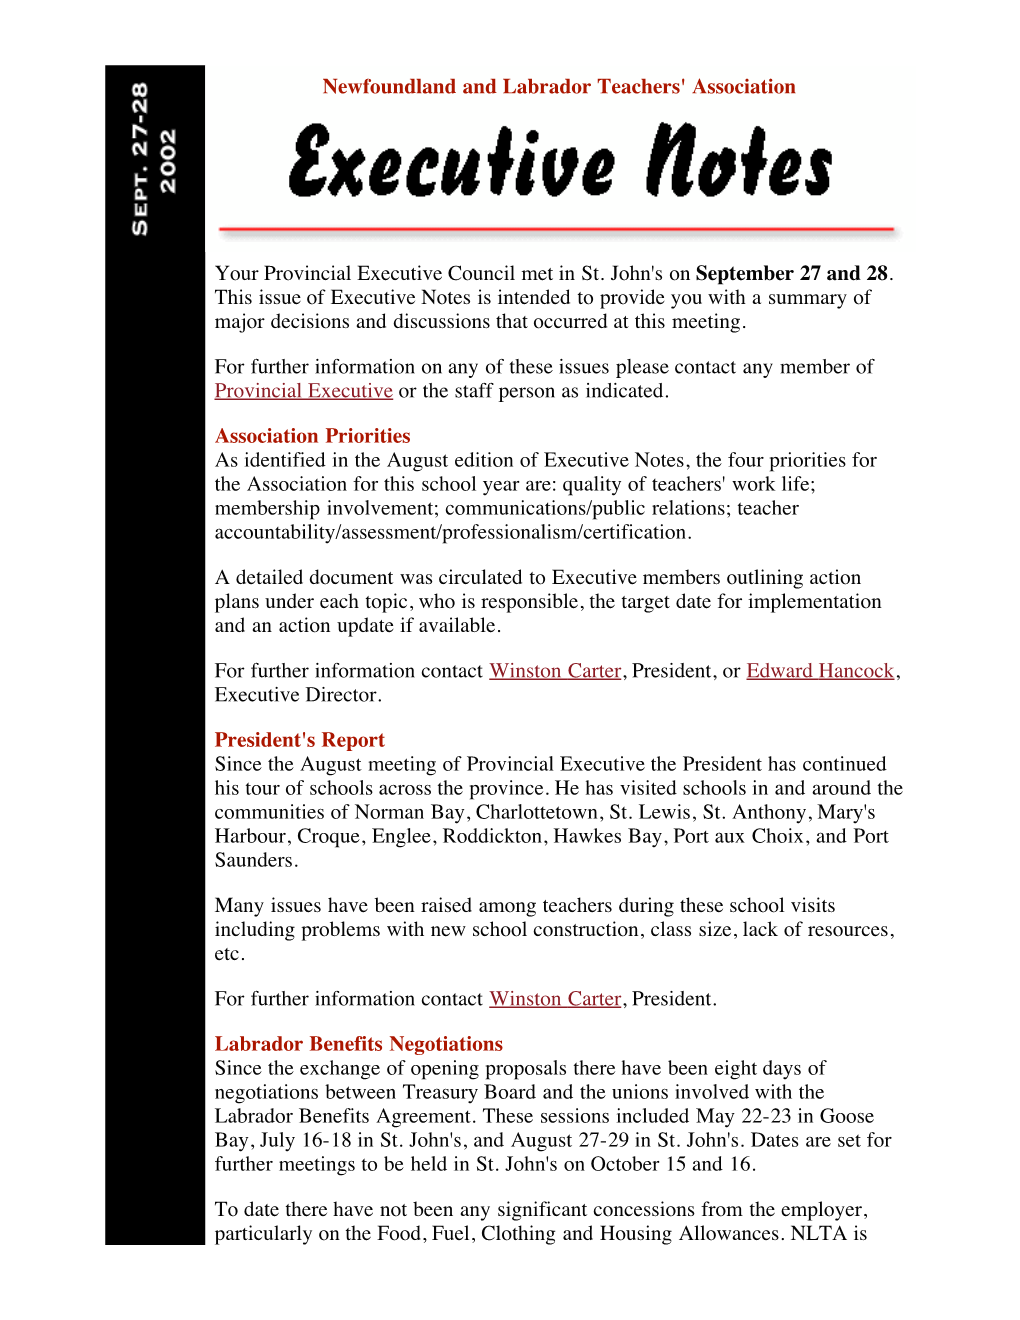 Executive Notes Is Intended to Provide You with a Summary of Major Decisions and Discussions That Occurred at This Meeting